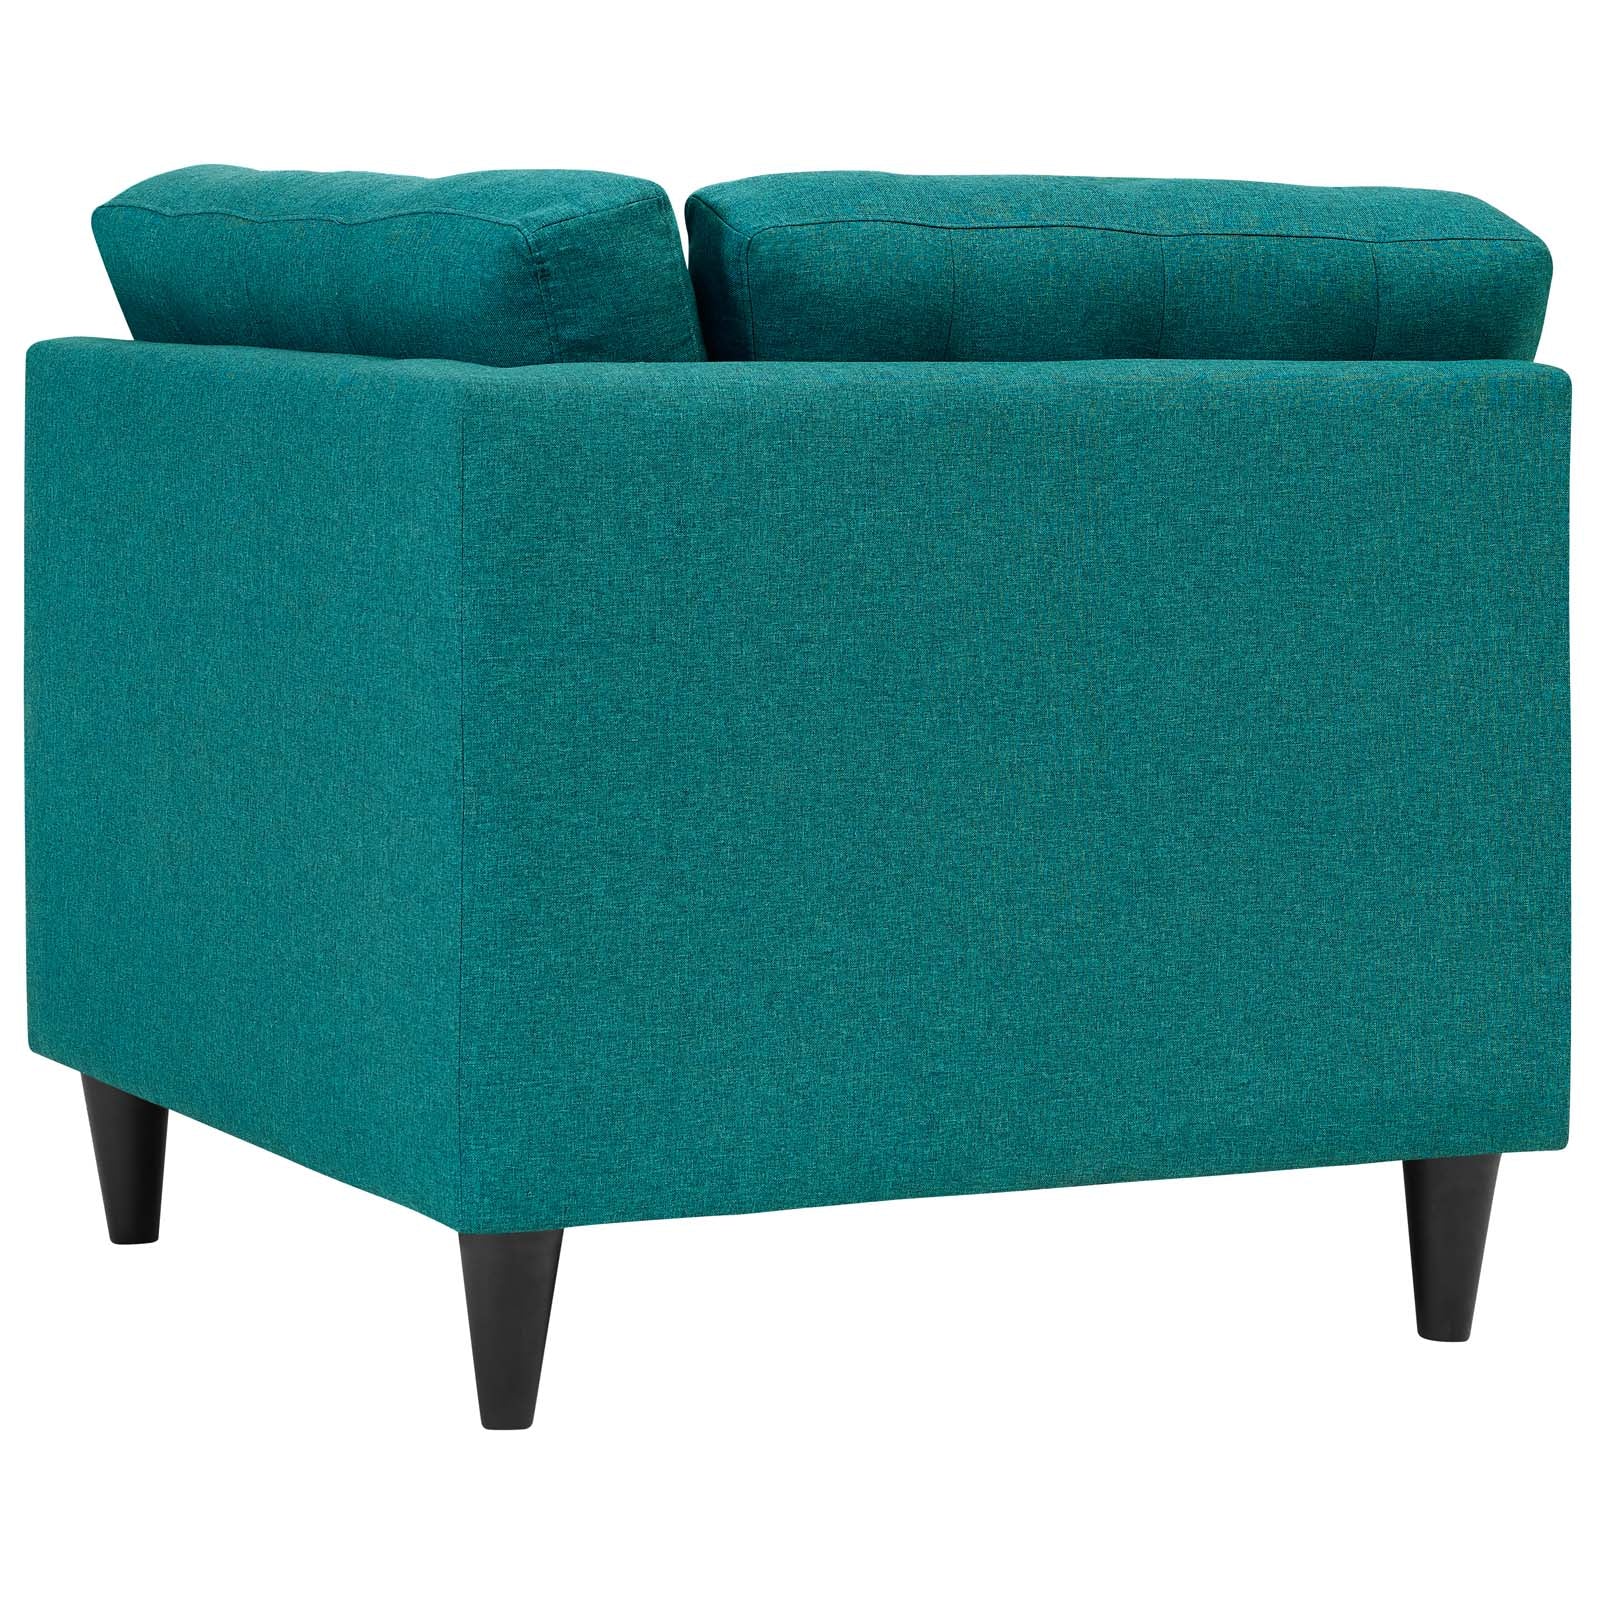 Modway Accent Chairs - Empress Upholstered Fabric Corner Sofa Teal